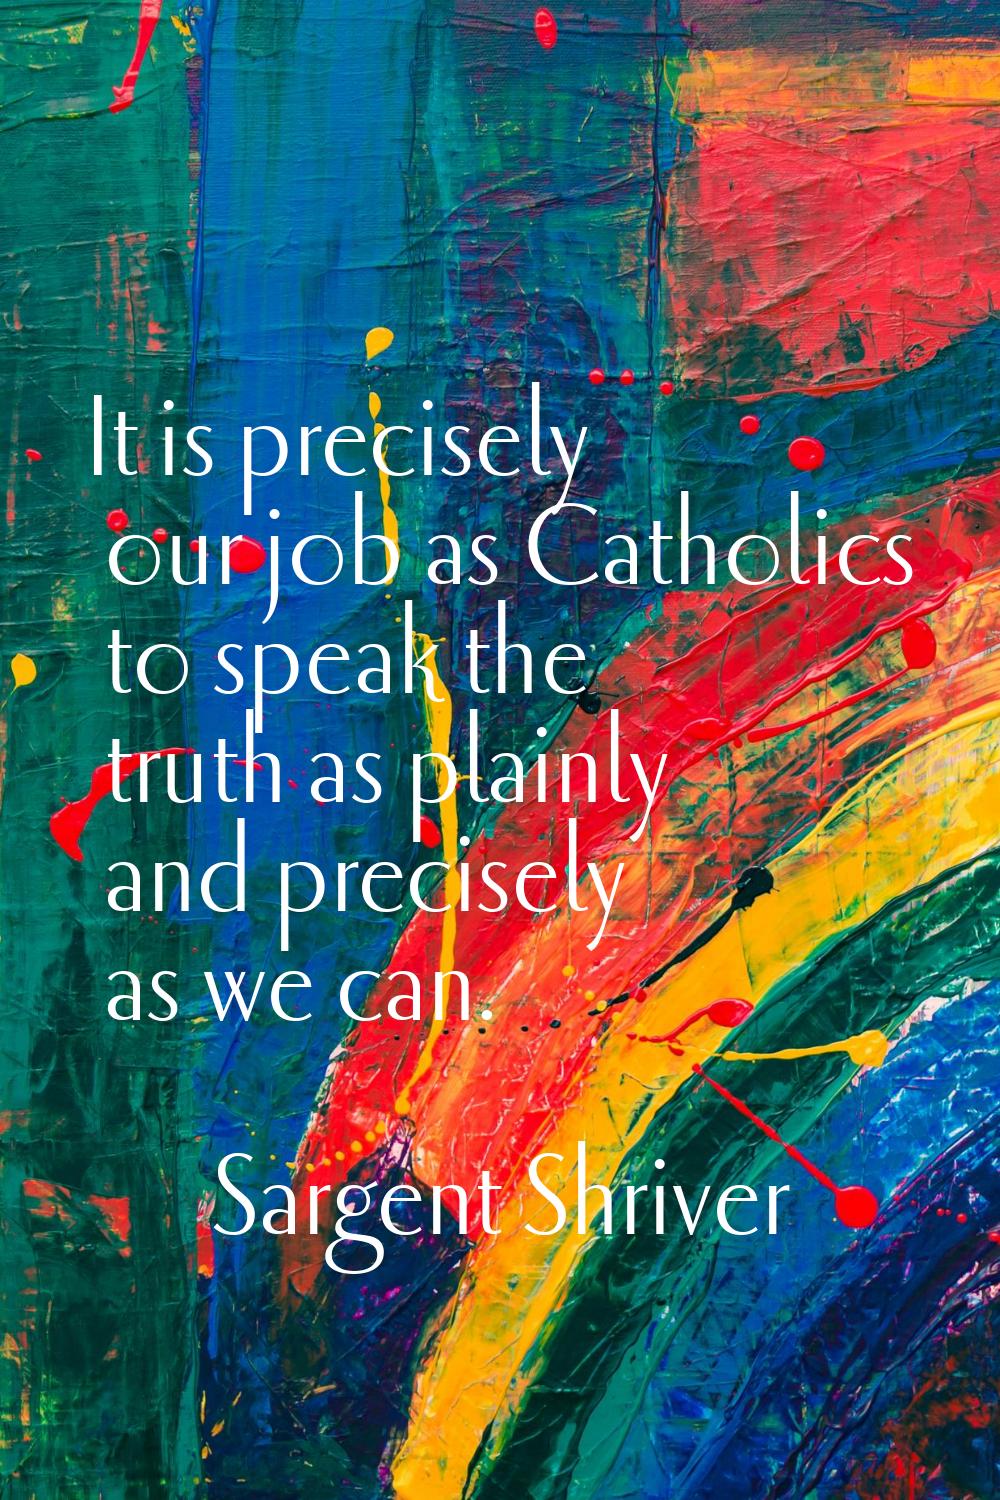 It is precisely our job as Catholics to speak the truth as plainly and precisely as we can.